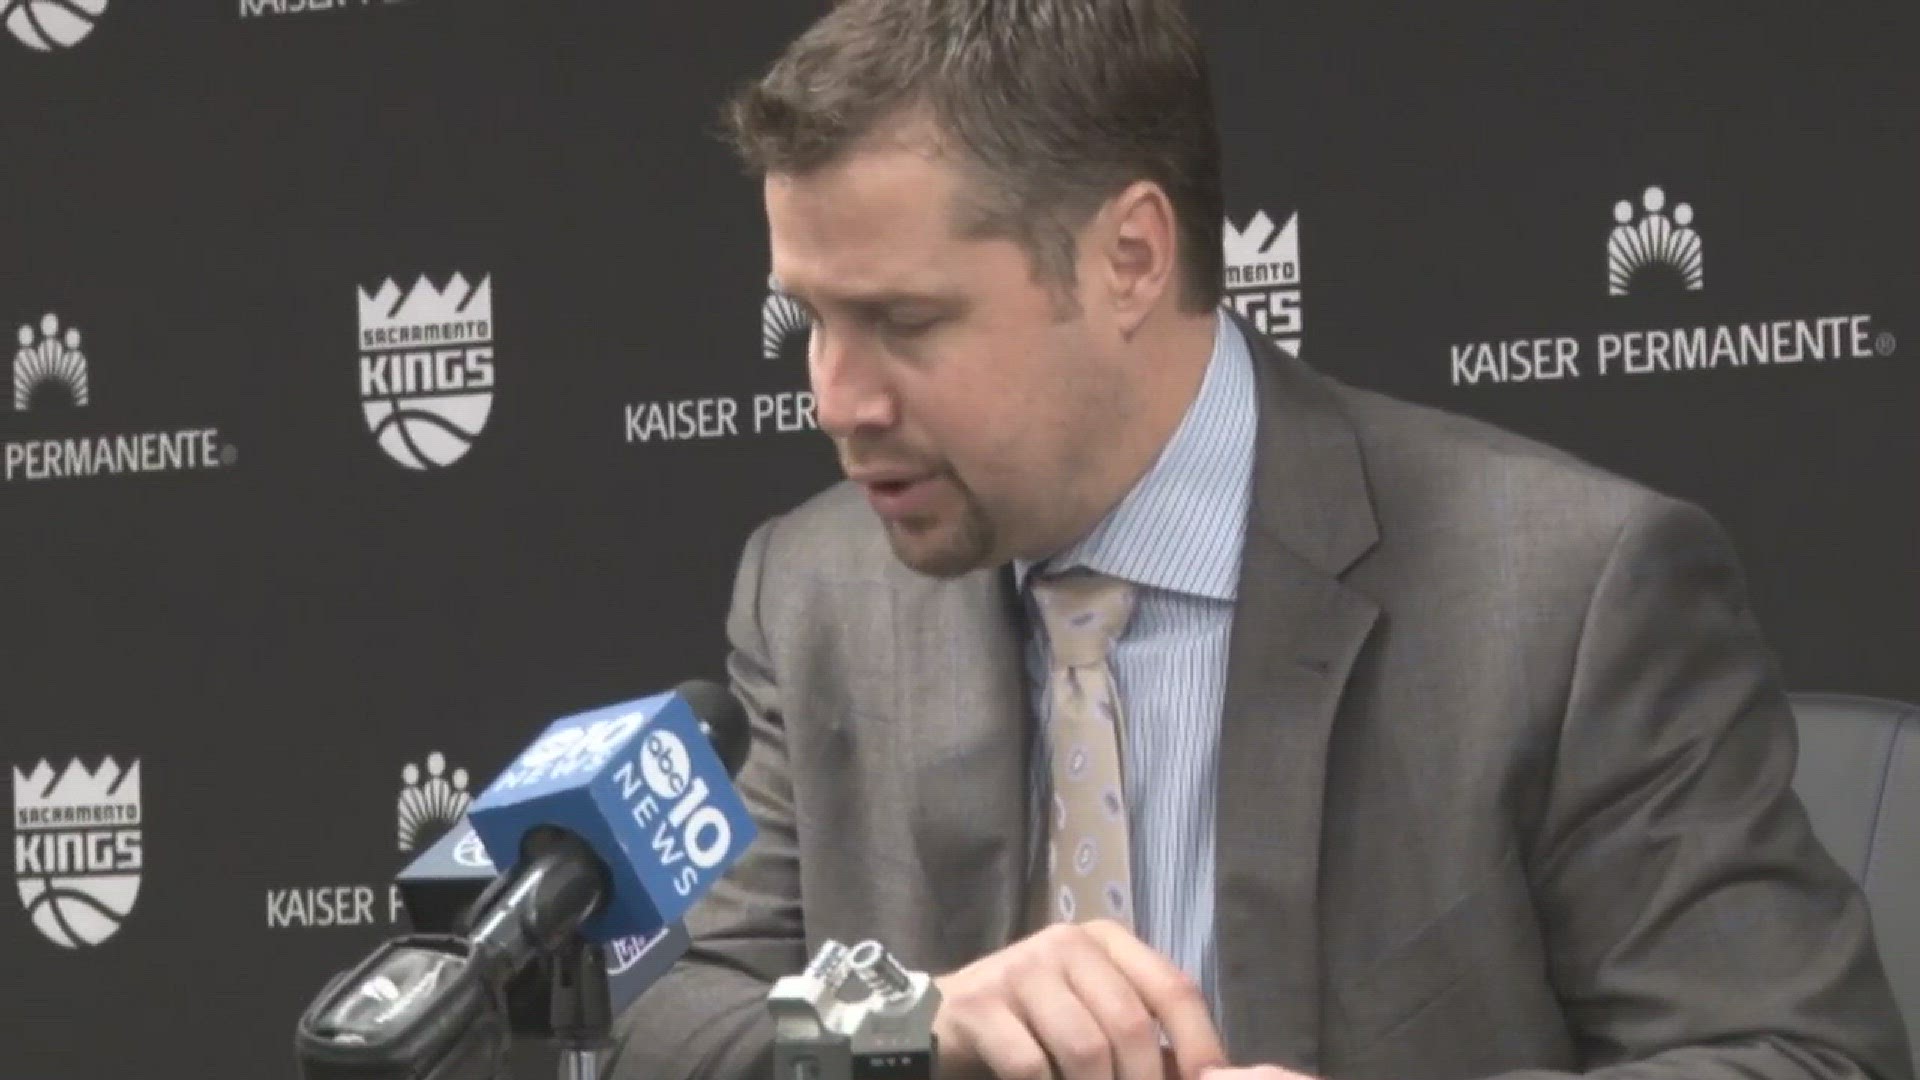 Sacramento Kings head coach Dave Joerger discusses Sunday's home loss to the Golden State Warriors, the frustrations from DeMarcus Cousins and being proud of his team's effort.